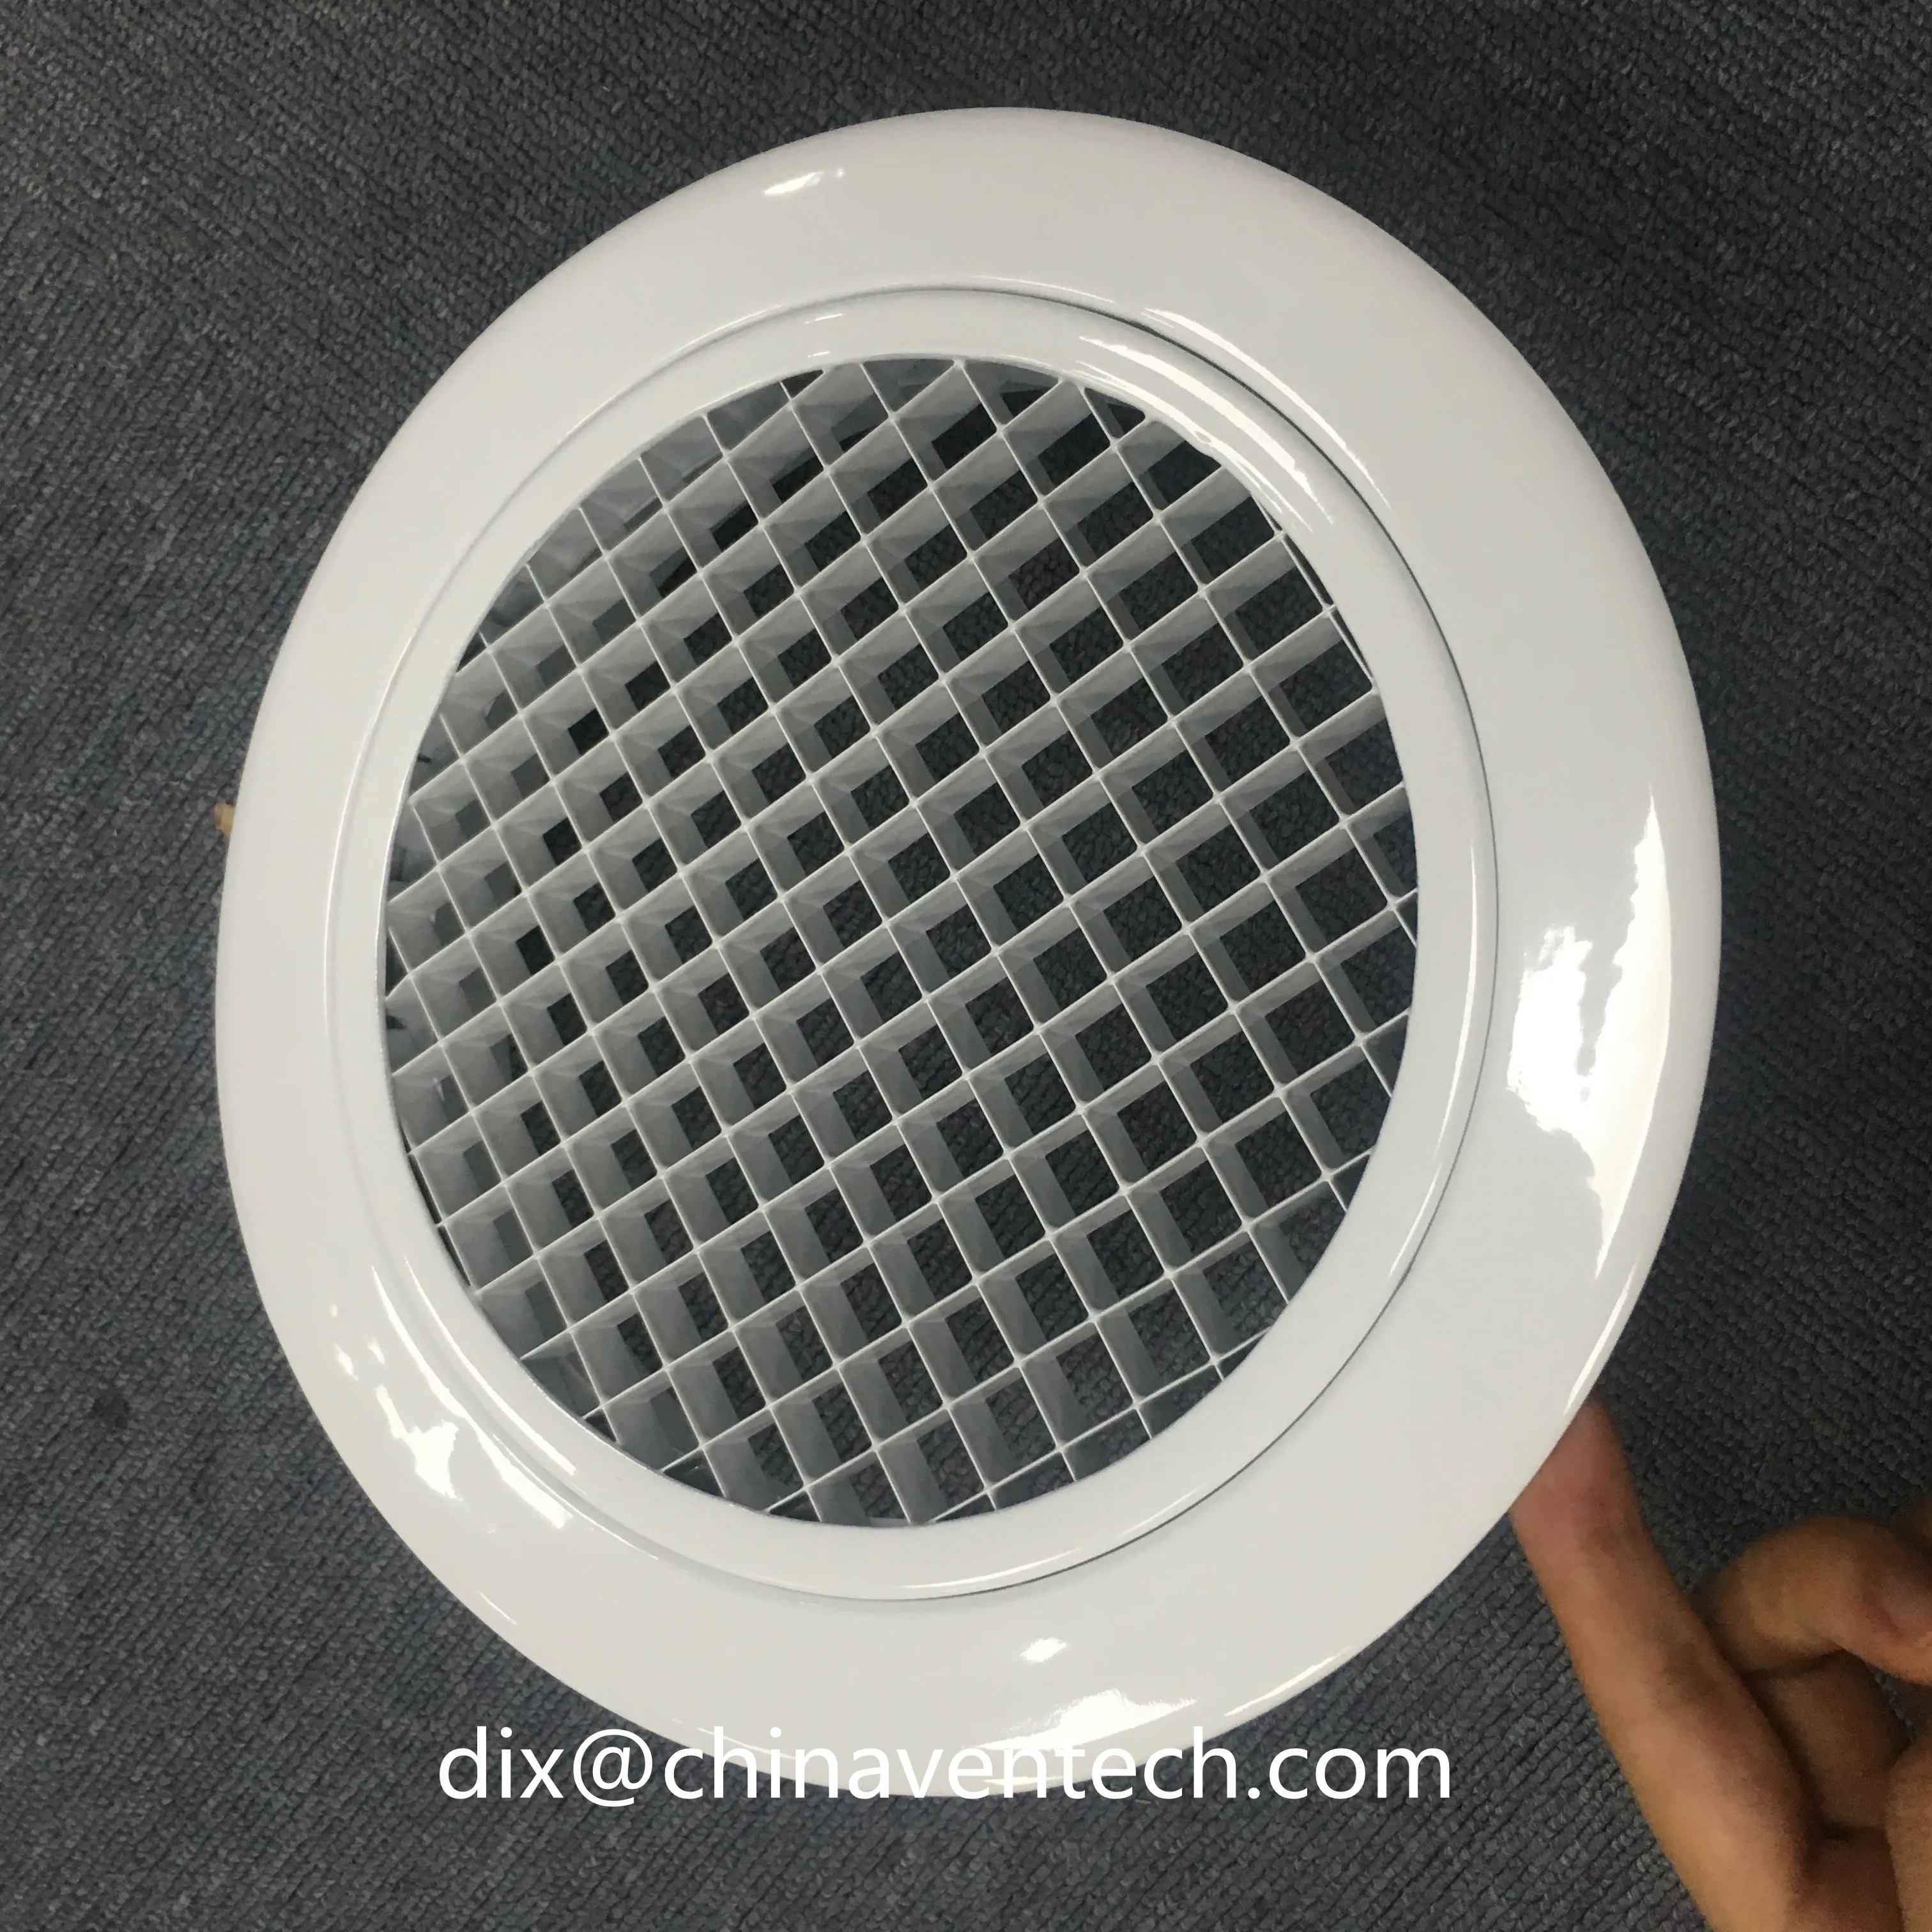 Hvac systems air diffuser egg crate core eggcrate ceiling aluminum air grille